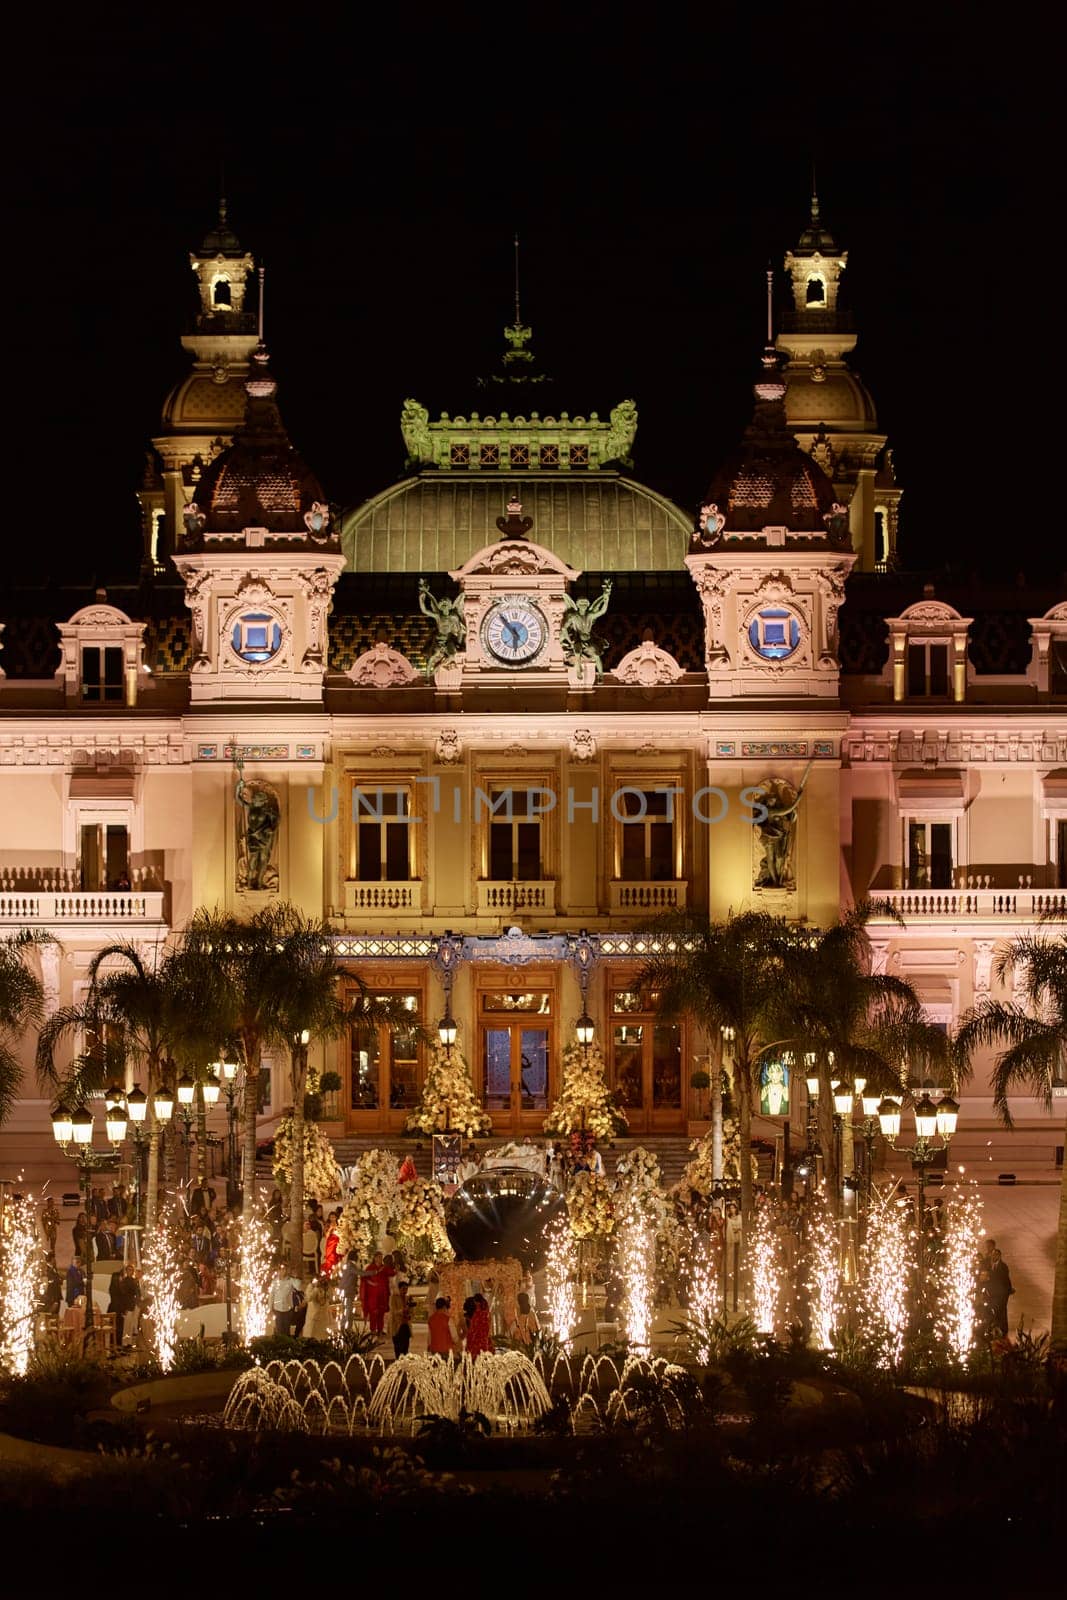 Monaco, Monte-Carlo, 12 November 2022: The famous Casino Monte-Carlo is at night, attraction night illumination, luxury cars, players, tourists, splashes of fountain. High quality photo